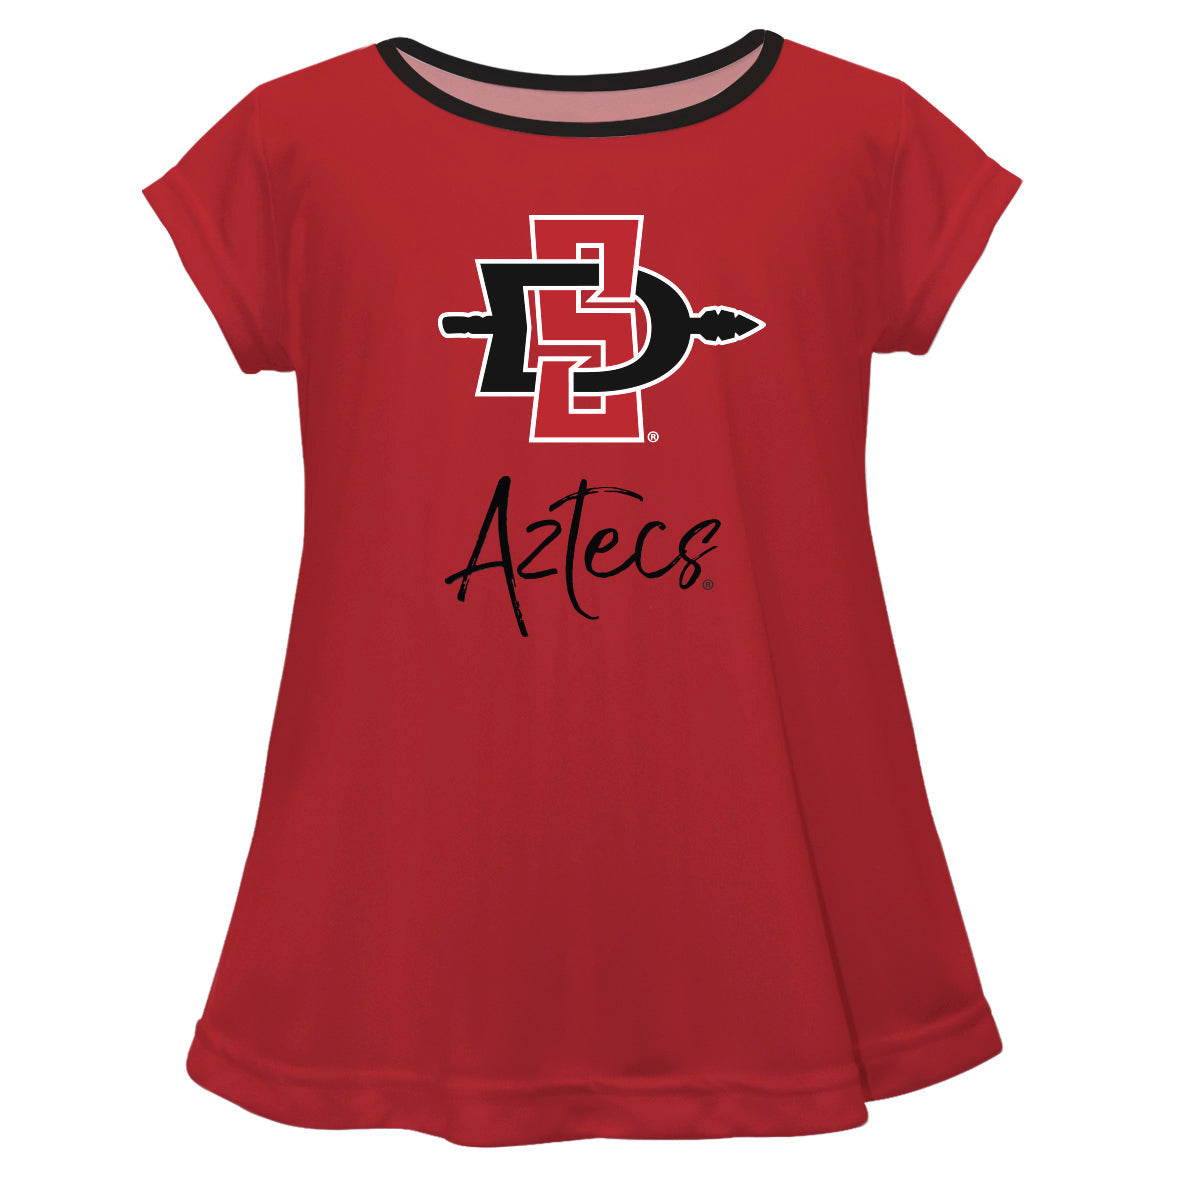 San Diego State University Aztecs SDSU Girls Game Day Short Sleeve Red Laurie Top by Vive La Fete